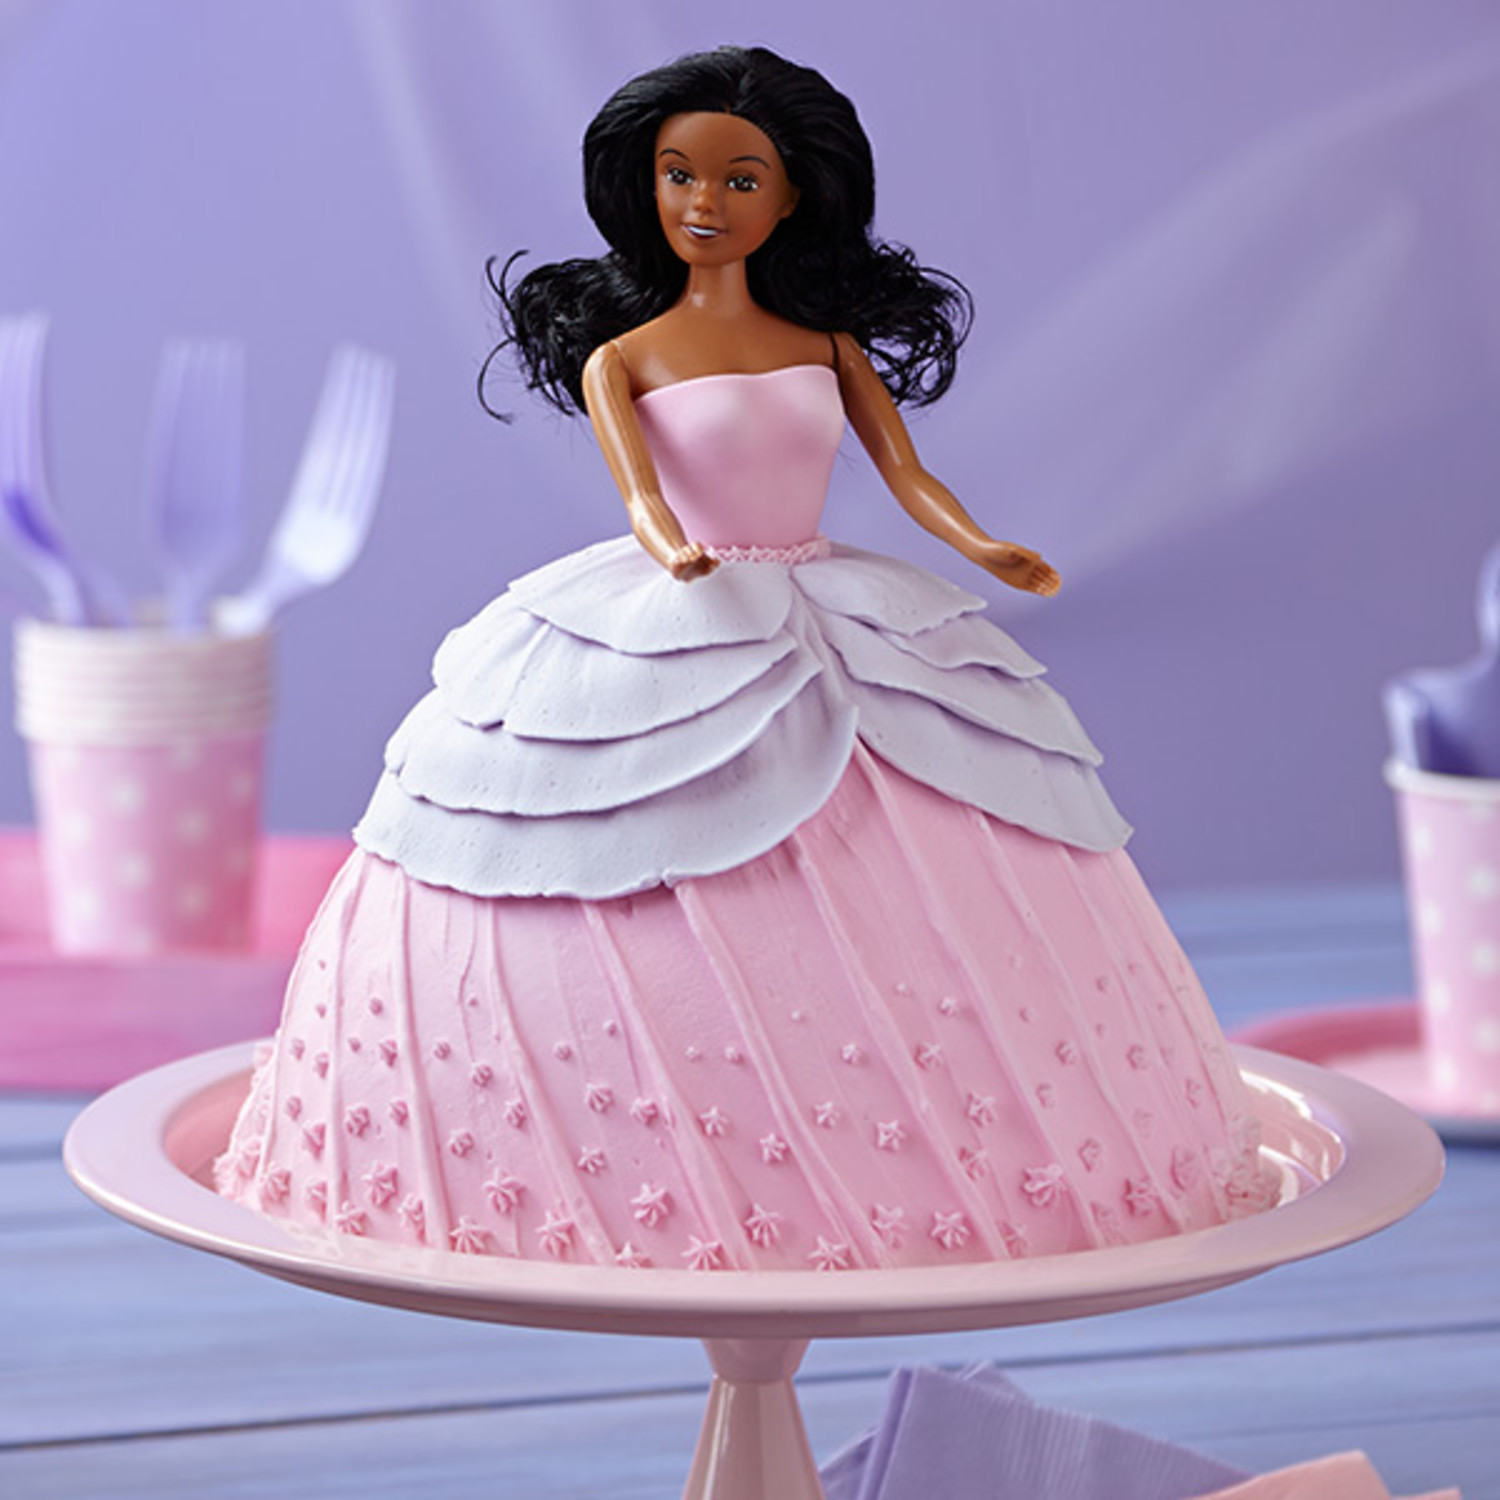 Doll in Pink Dress Cake